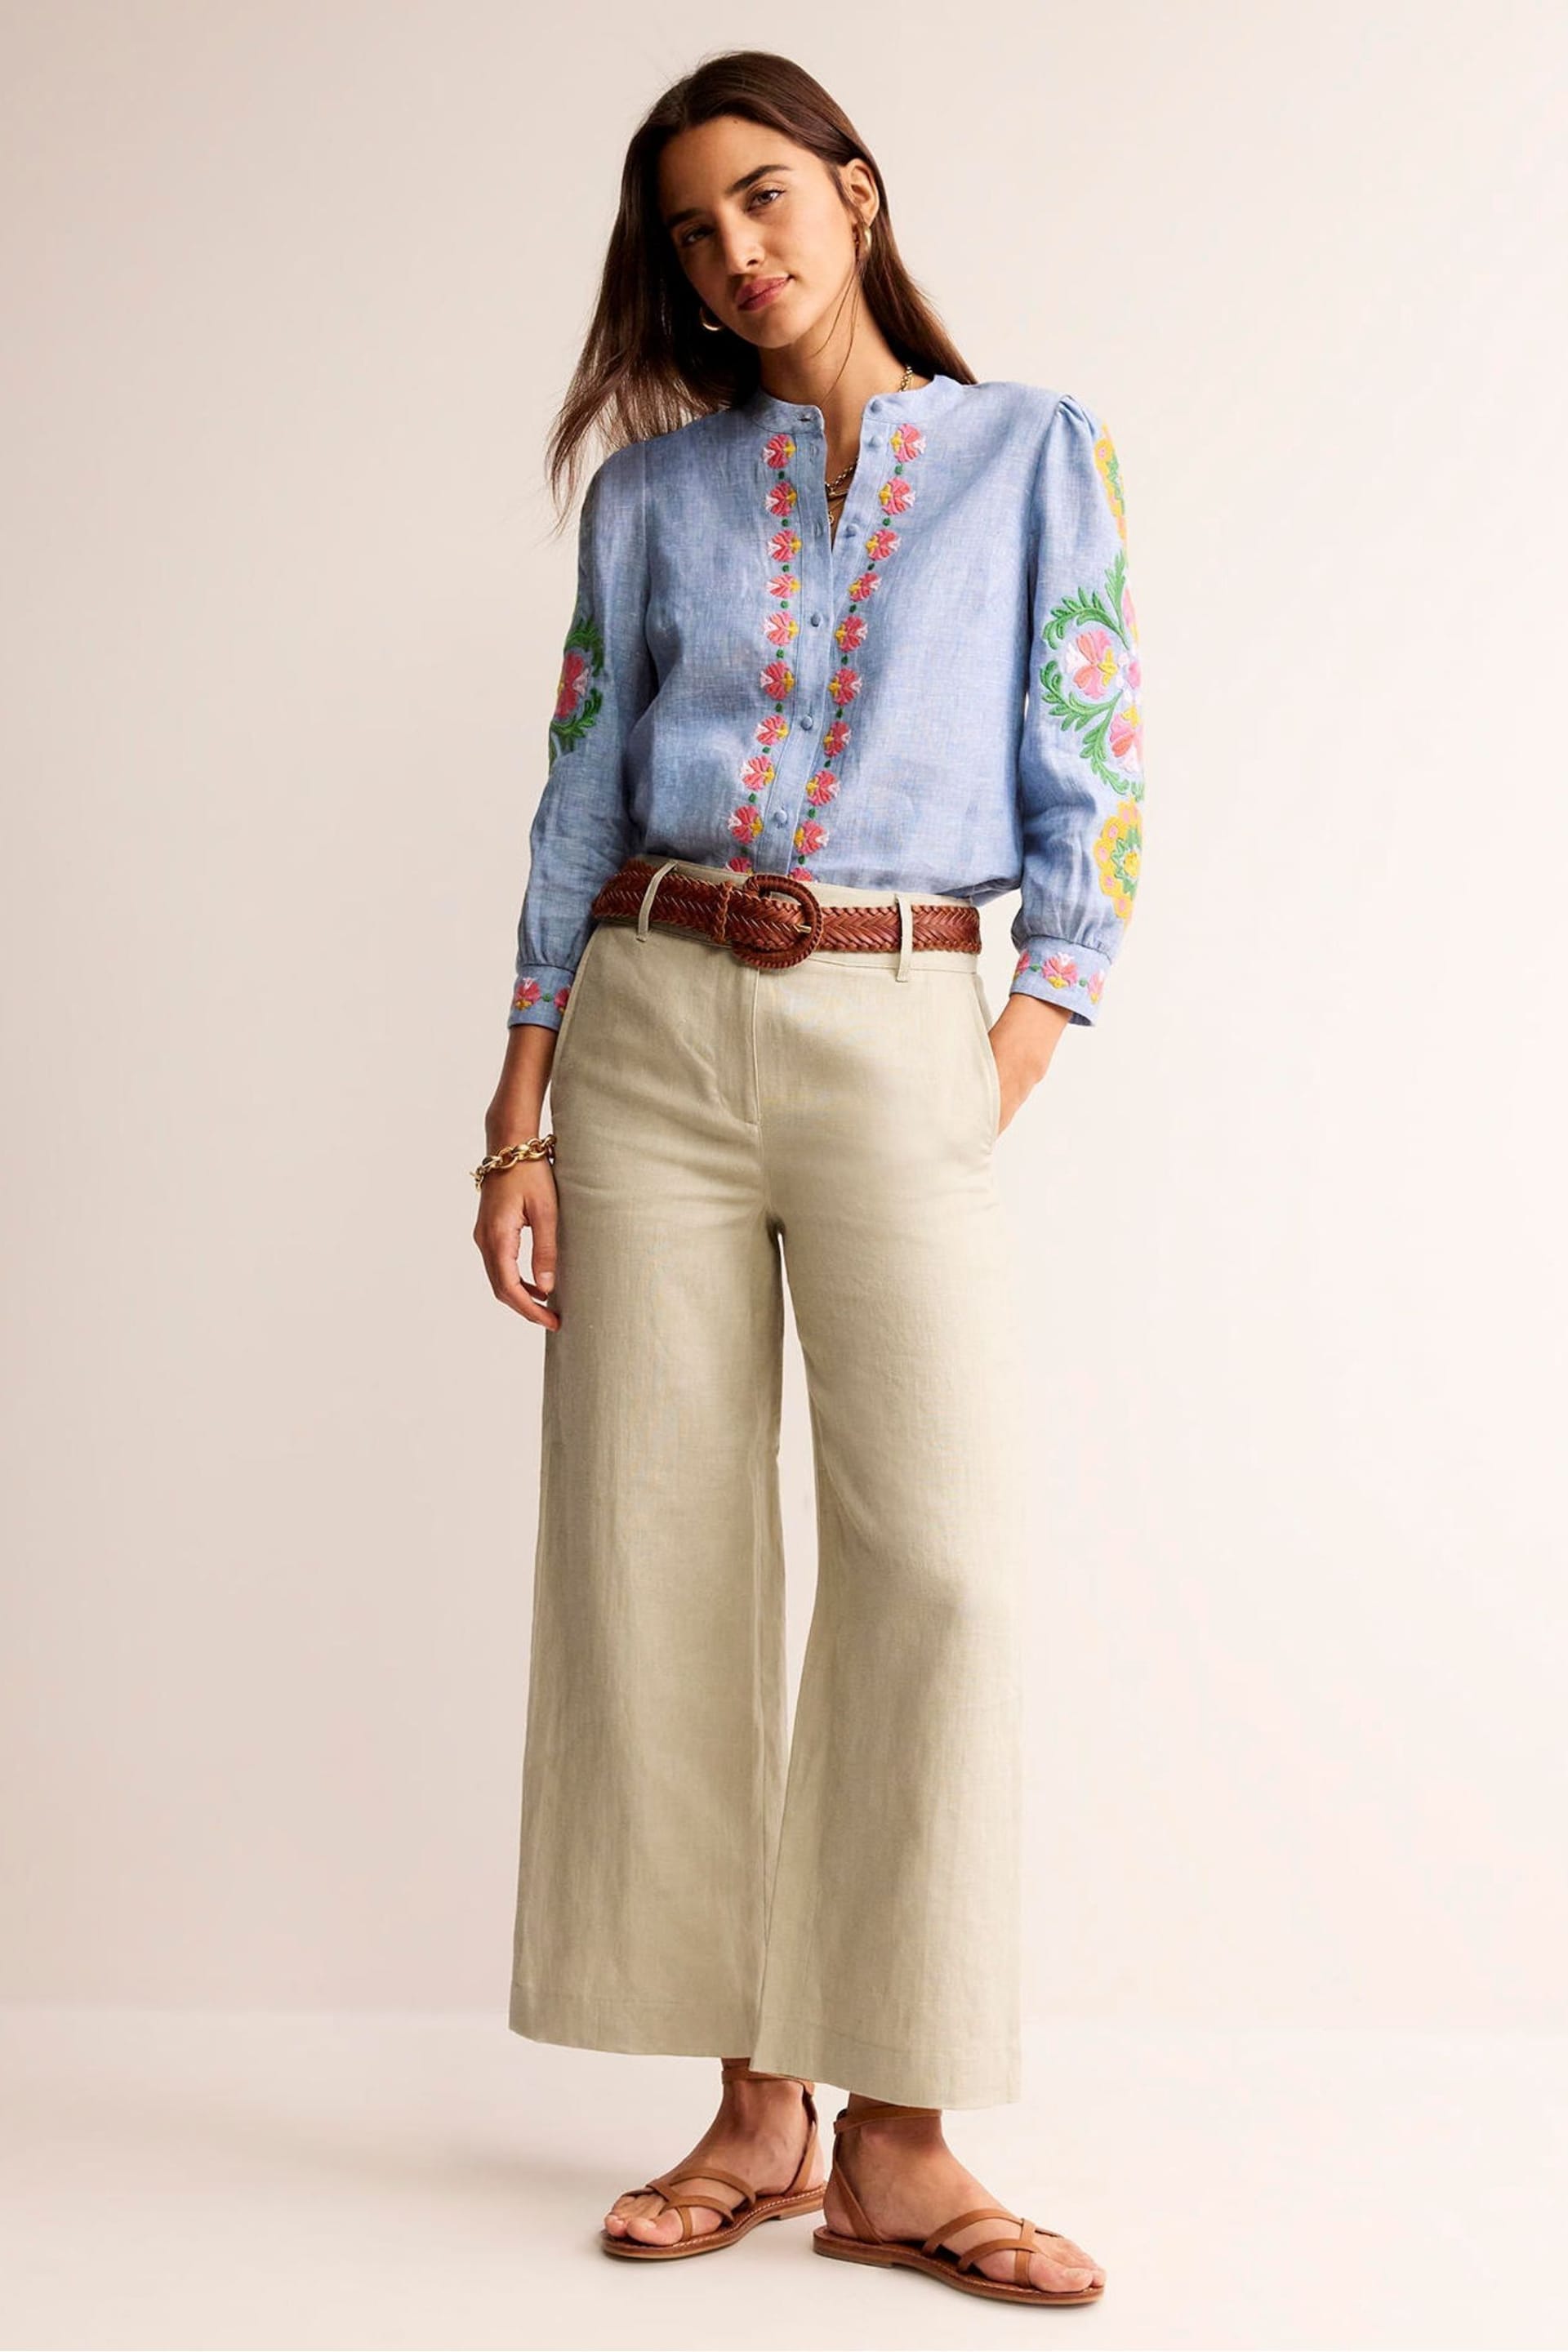 Boden Natural Westbourne Crop Linen Trousers - Image 3 of 5